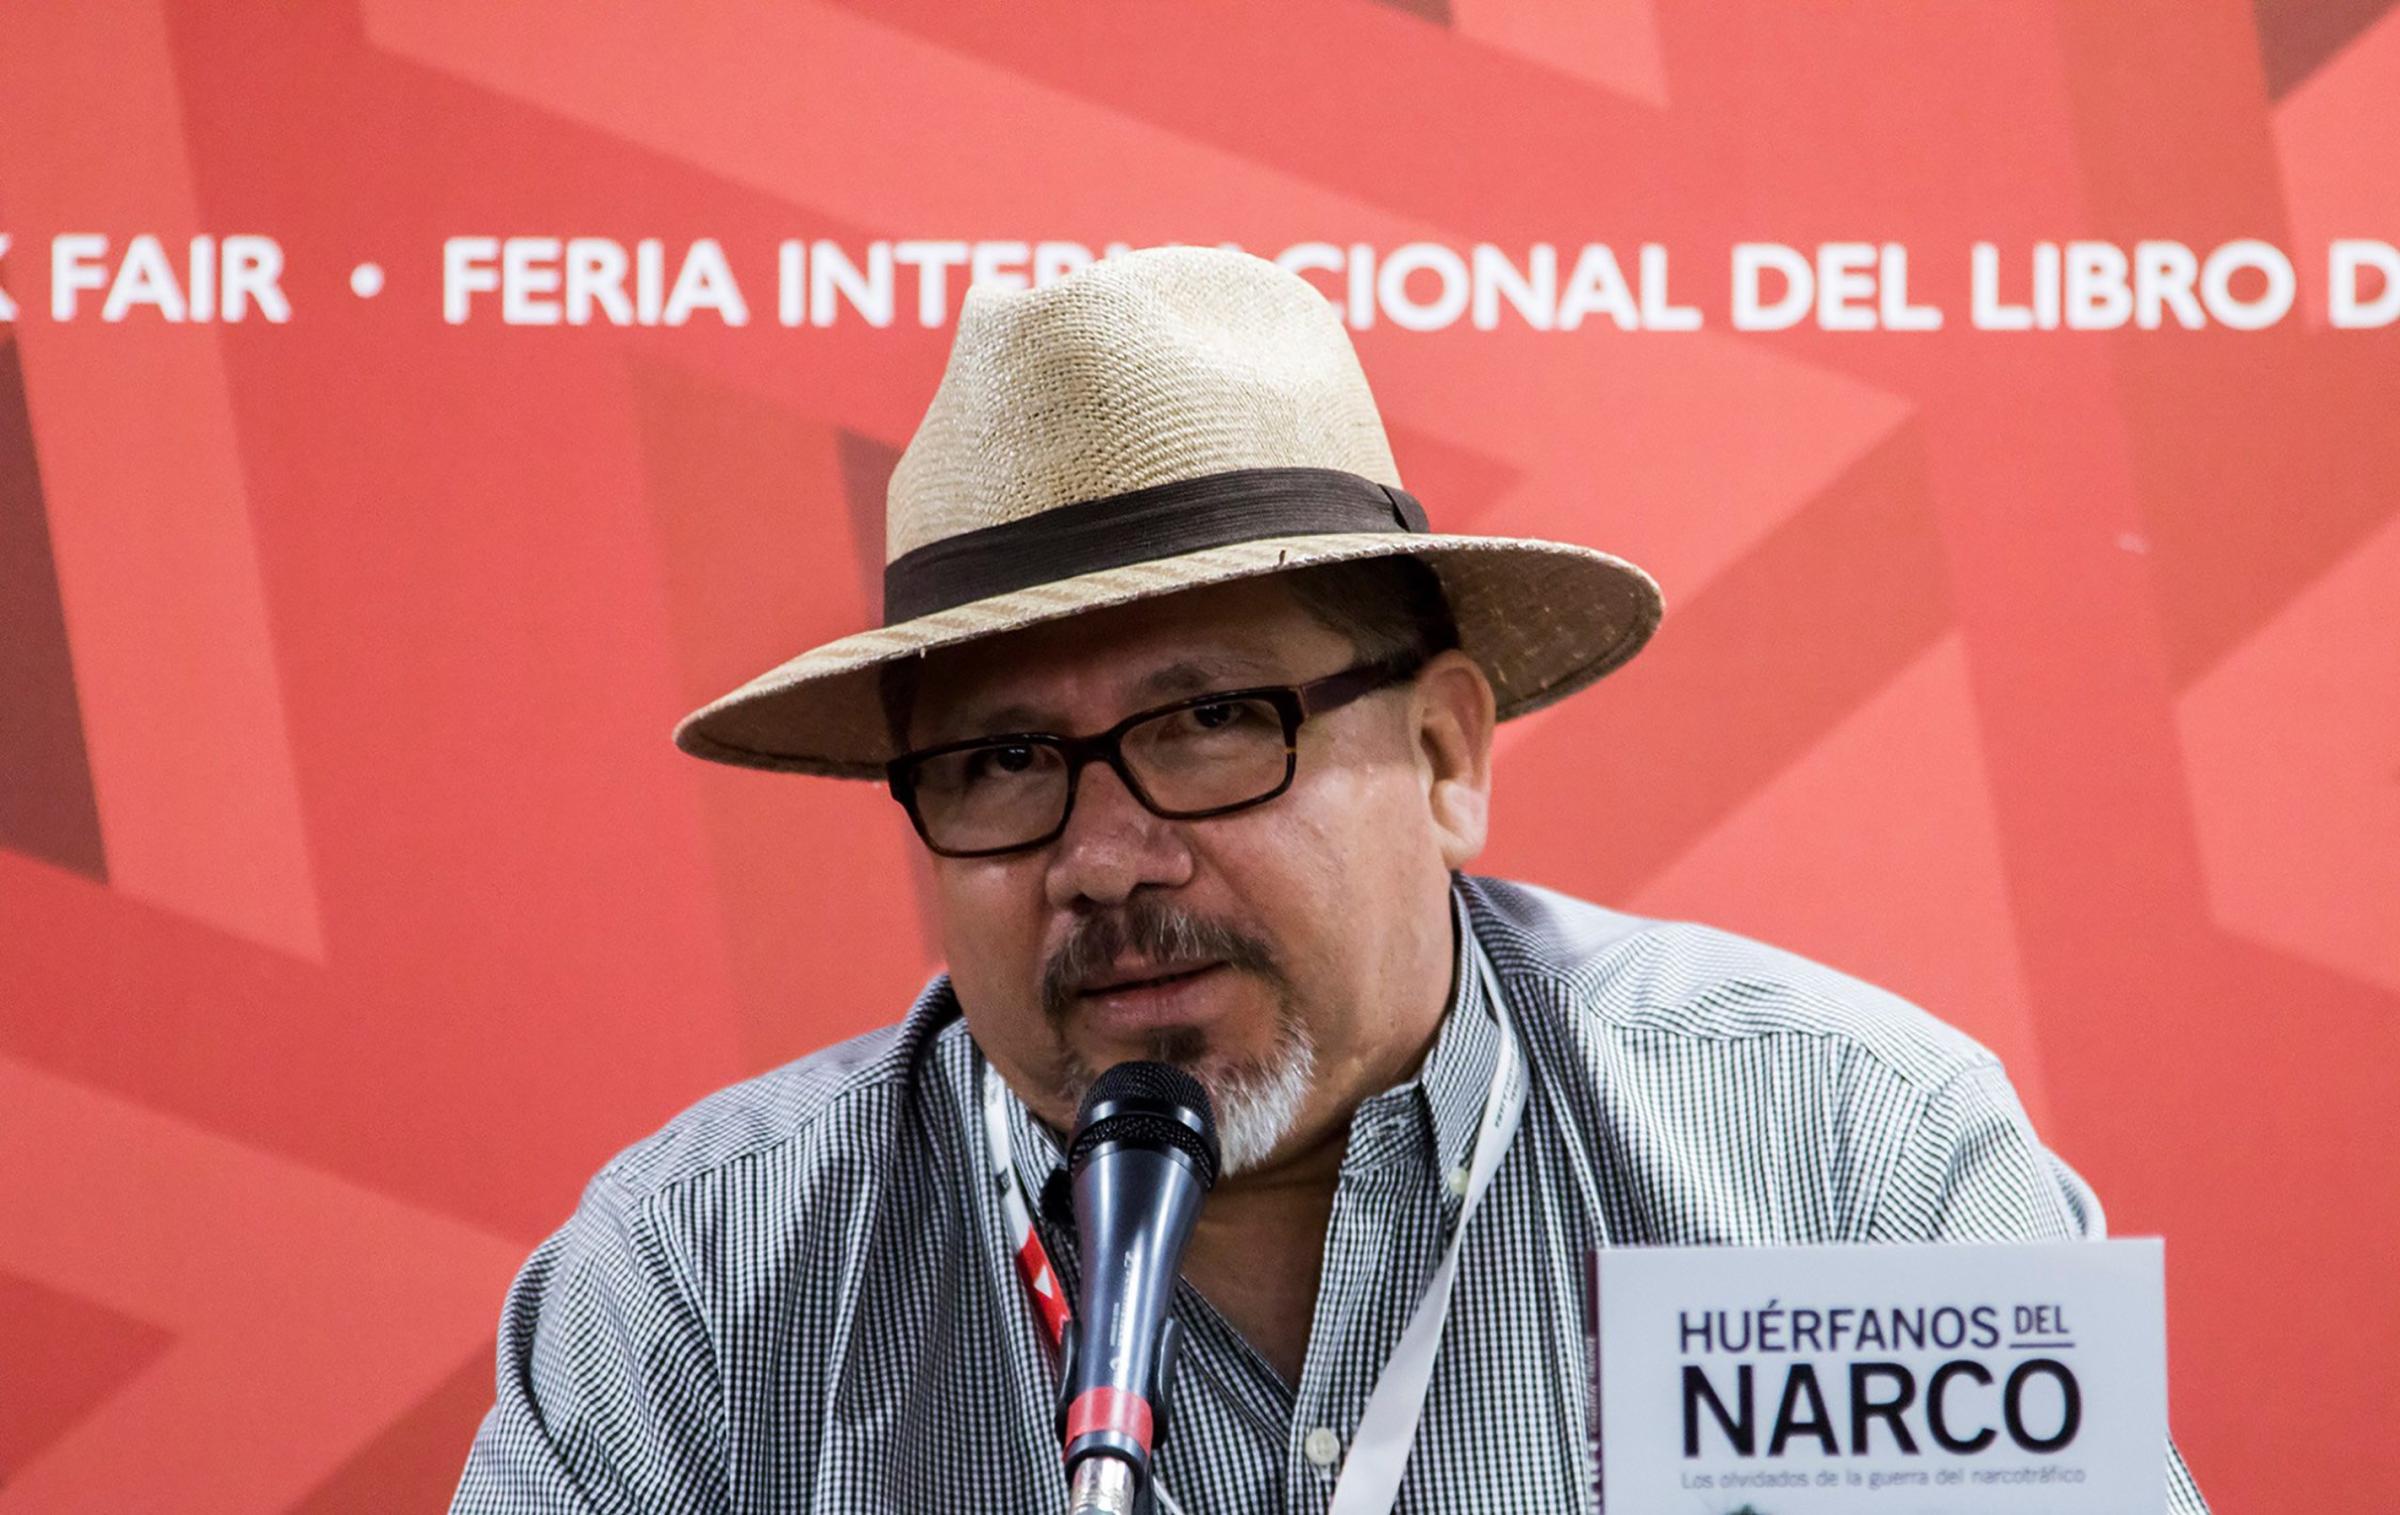 Mexican journalist Javier Valdez speaking during the presentation of his book "Huerfanos del Narco" in the framework of the International Book Fair in Guadalajara, Mexico on Nov. 27, 2016.